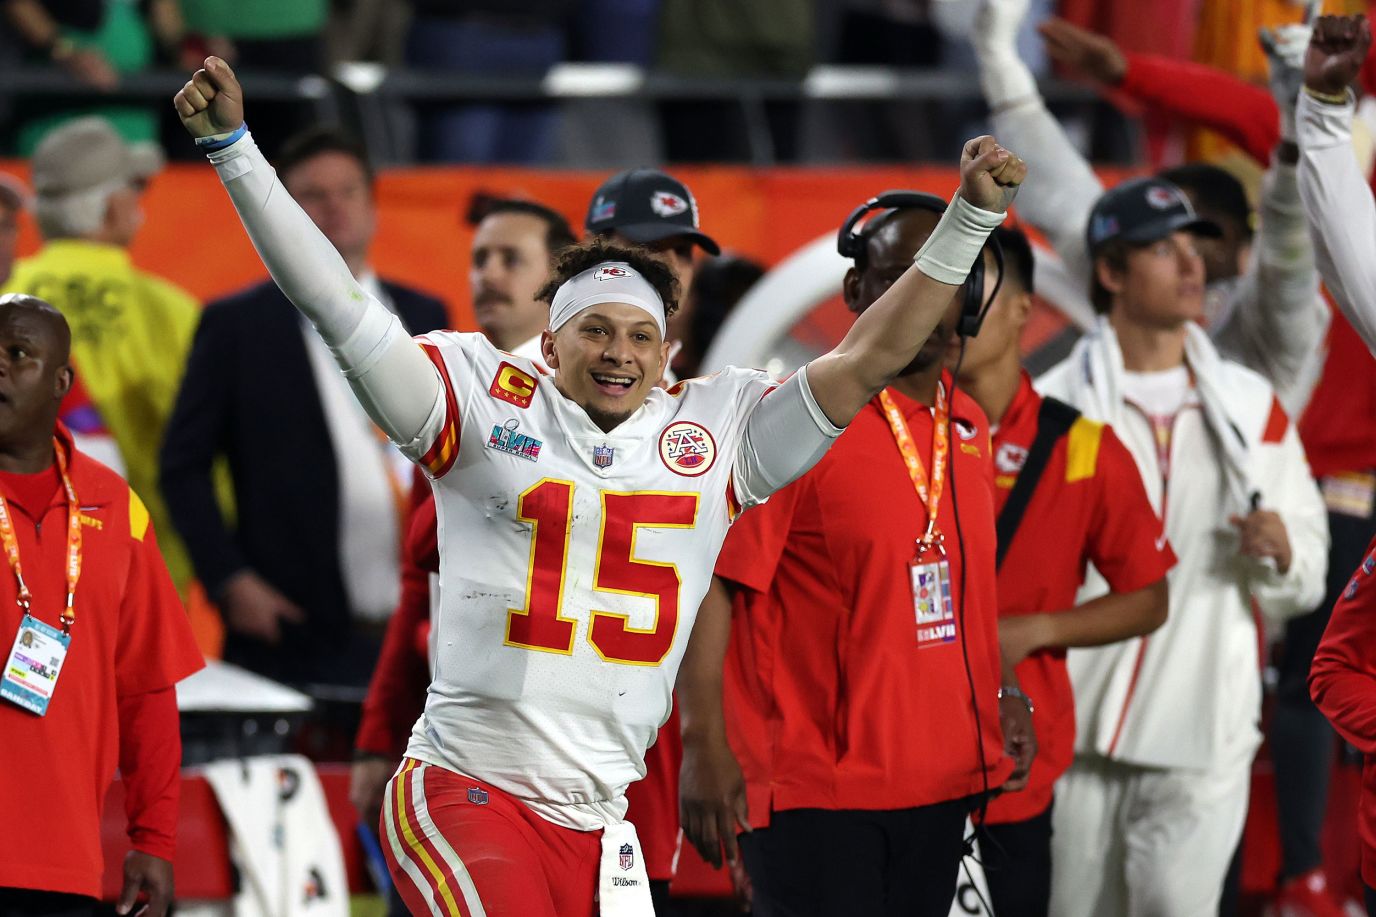 Chiefs surprise the experts in Superbowl extravaganza